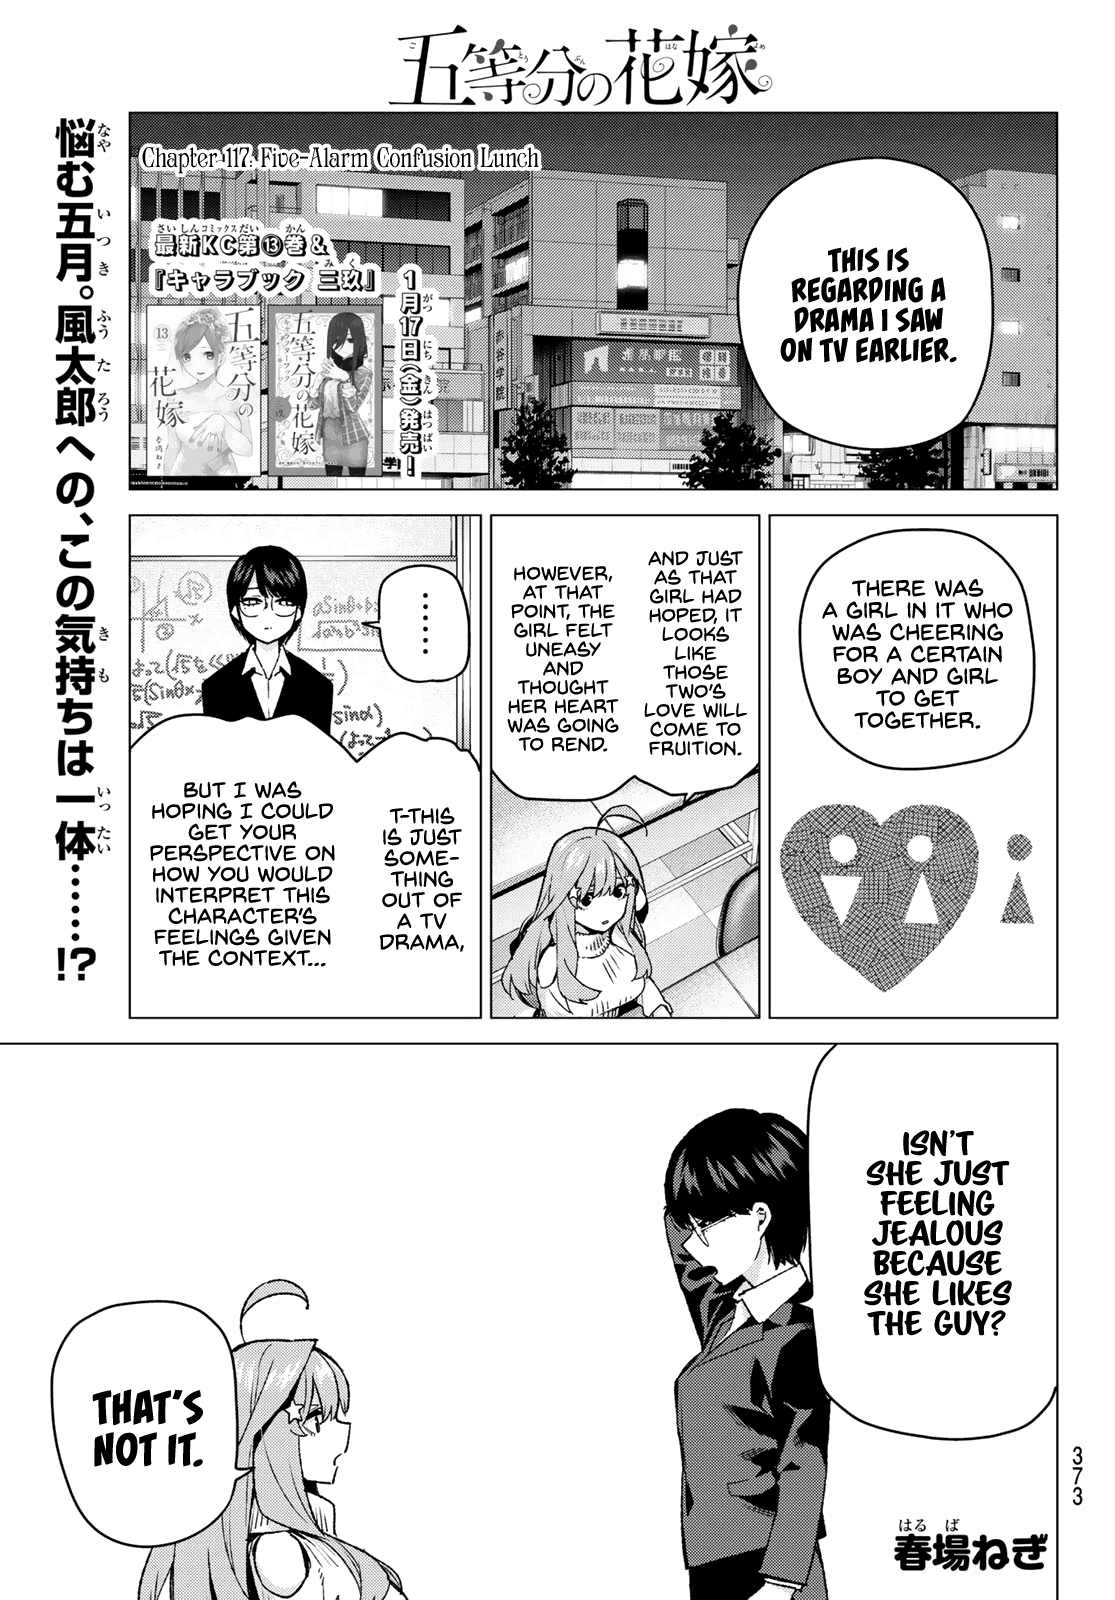 Go-Toubun No Hanayome Chapter 117: Five-Alarm Confusion Lunch - Picture 1